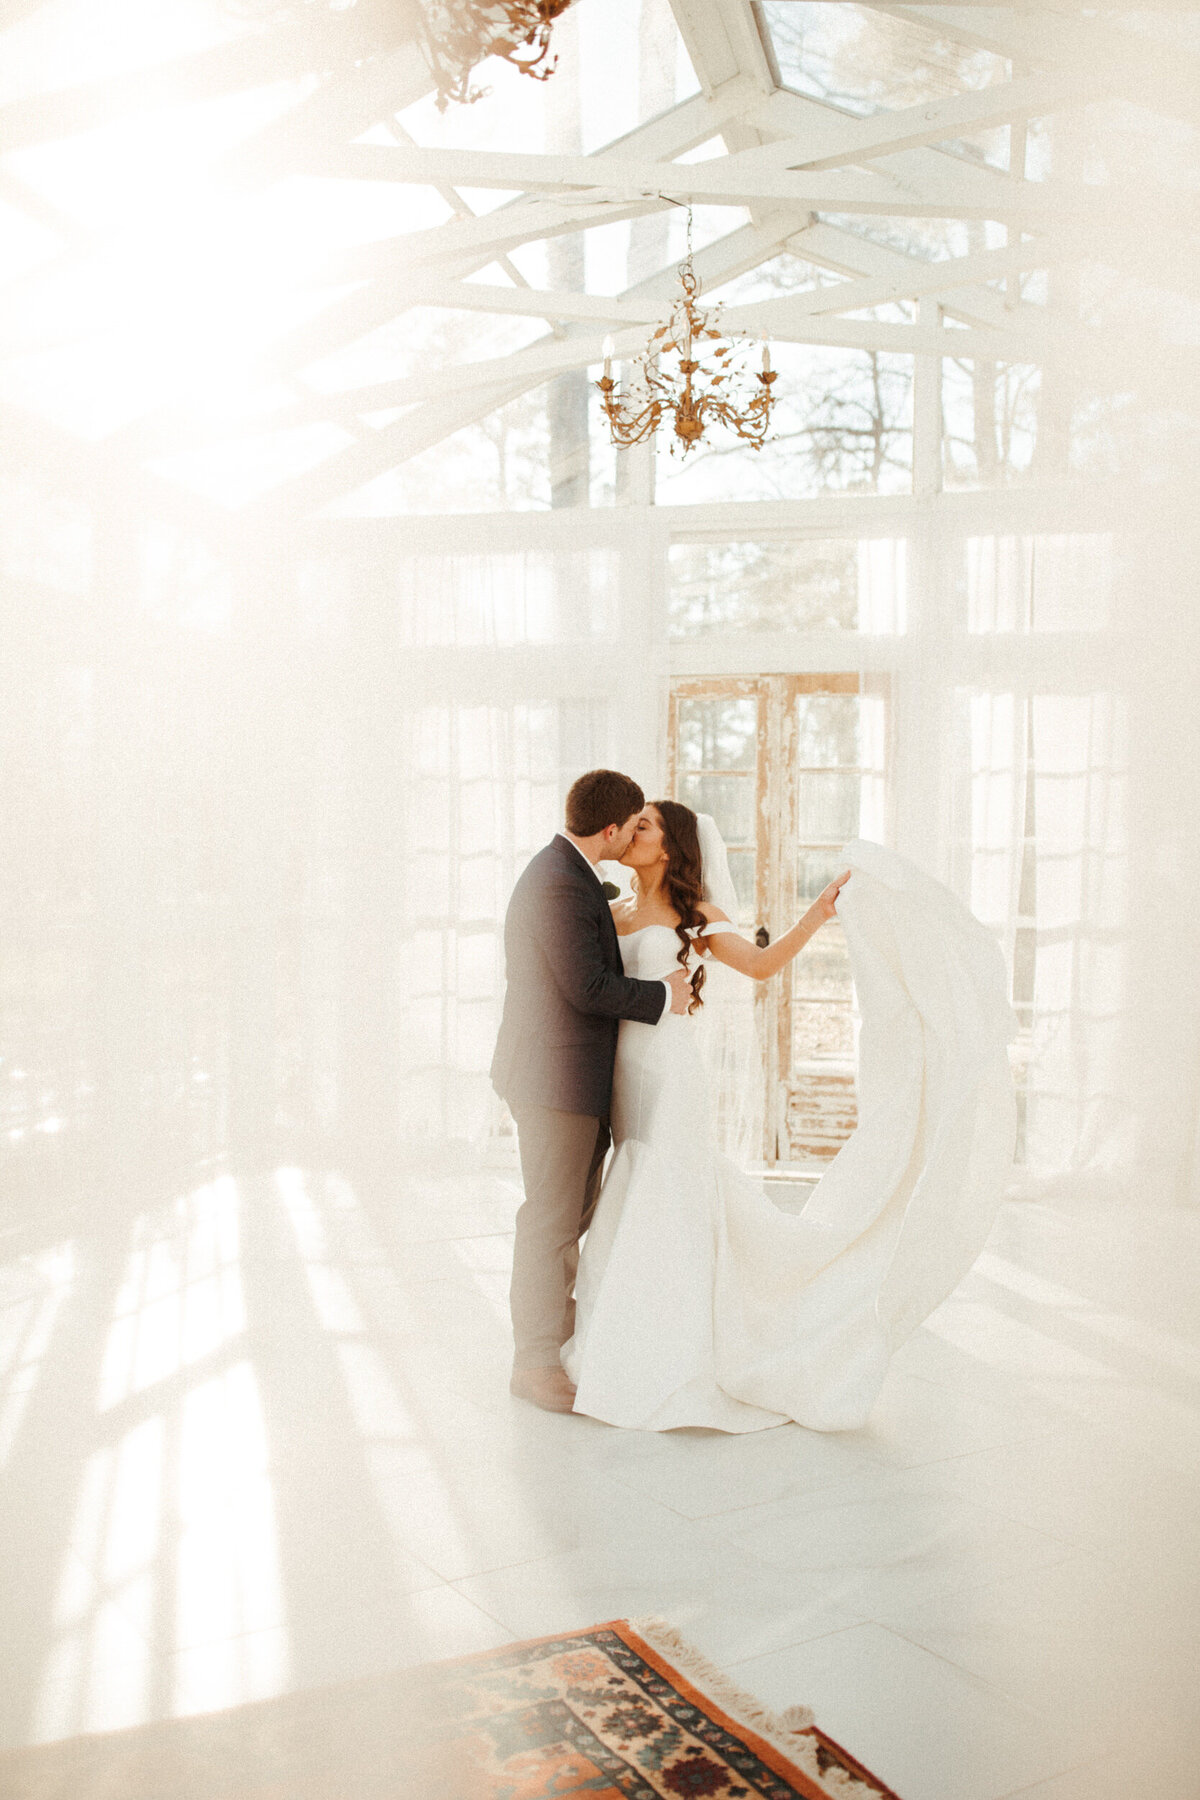 Bride and groom standing inside atelier while kissing as the sunlight pours in around them